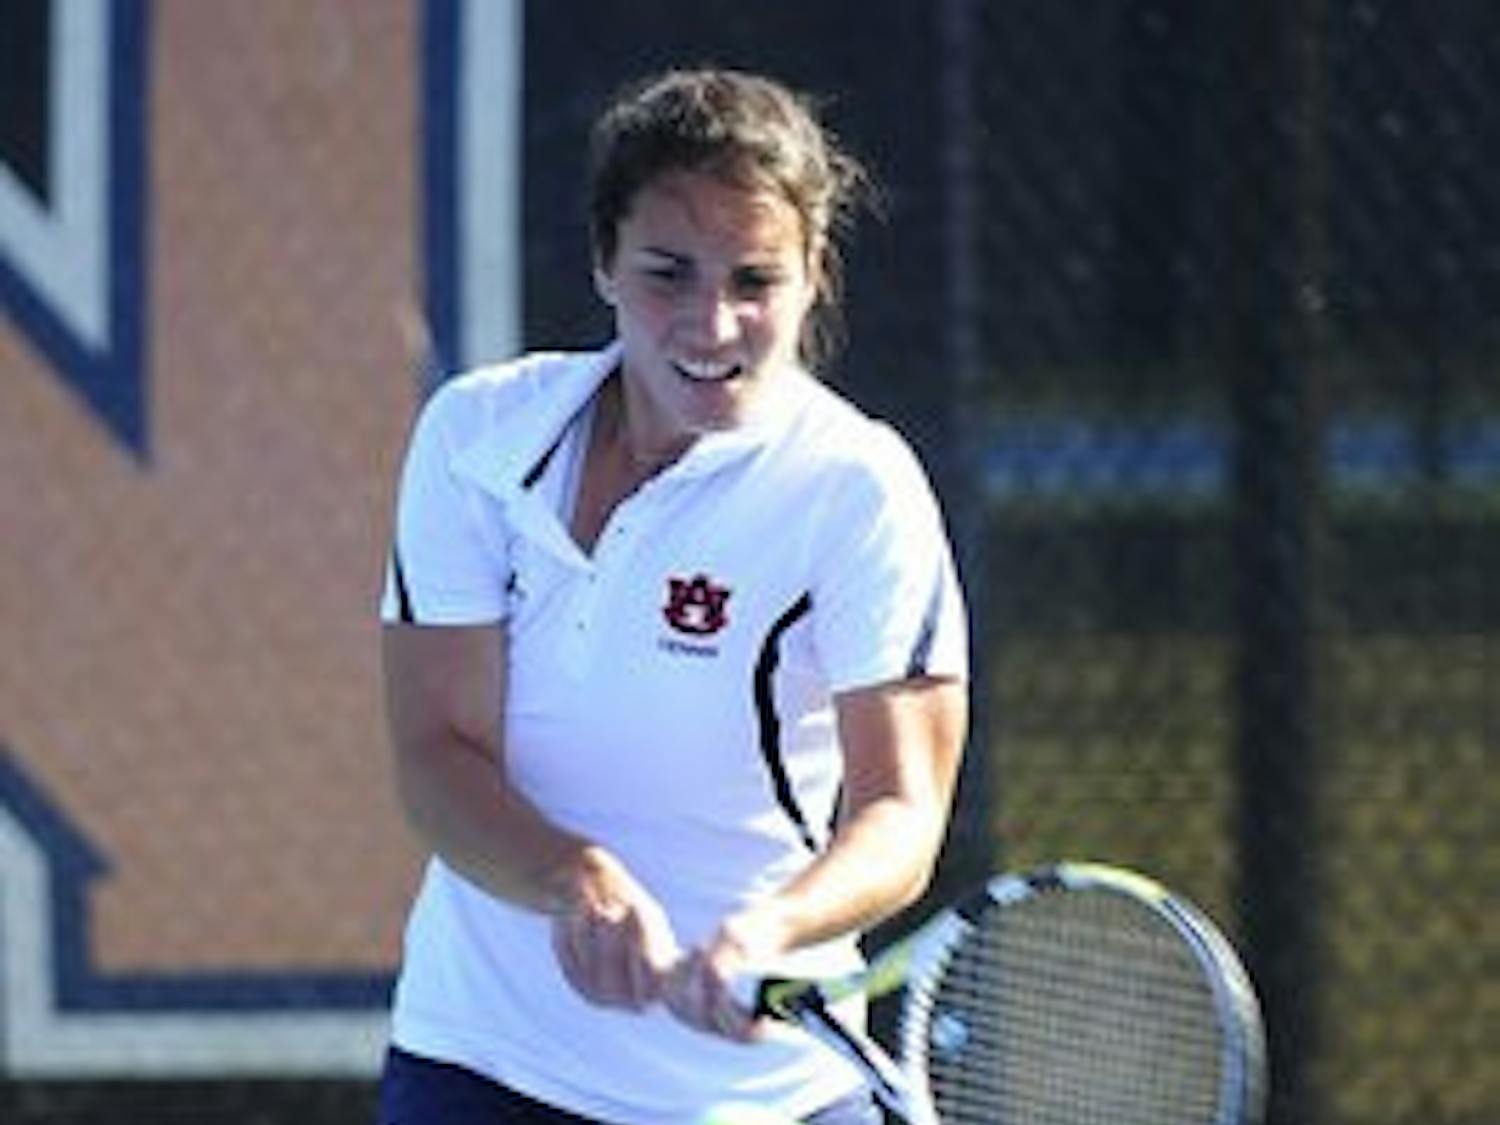 Plamena Kurteva moved from Bulgaria to Spain at age 14 and moved again to Auburn to play tennis. (Contributed by Media Relations)